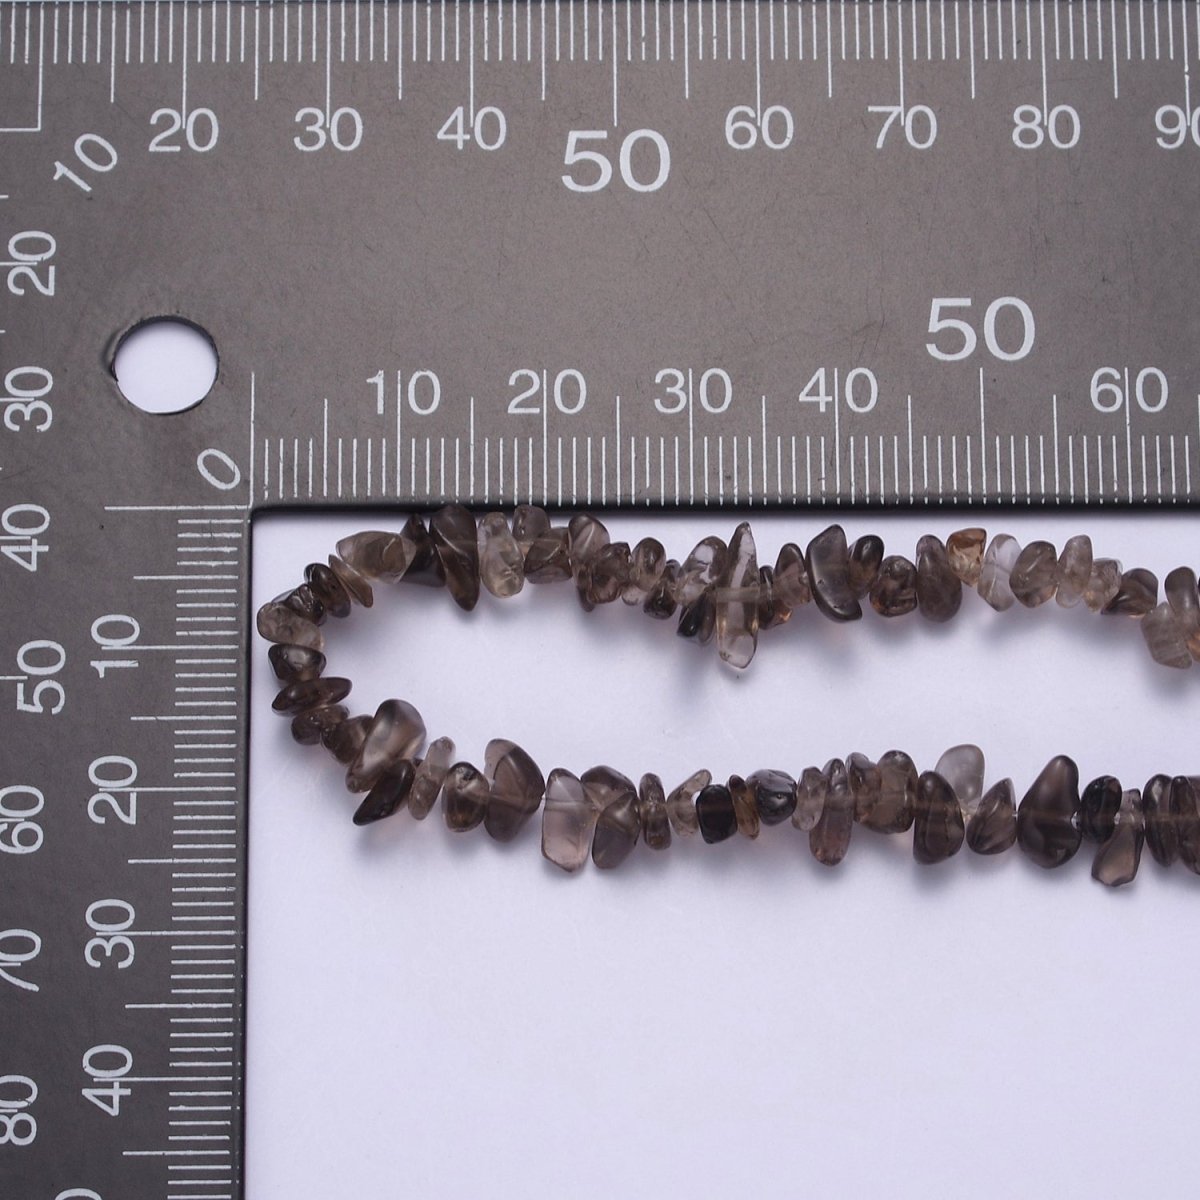 17.5 Inch Natural Dark Smokey Quartz Crystal Stone Bead Necklace with 2" Extender | WA-640 Clearance Pricing - DLUXCA